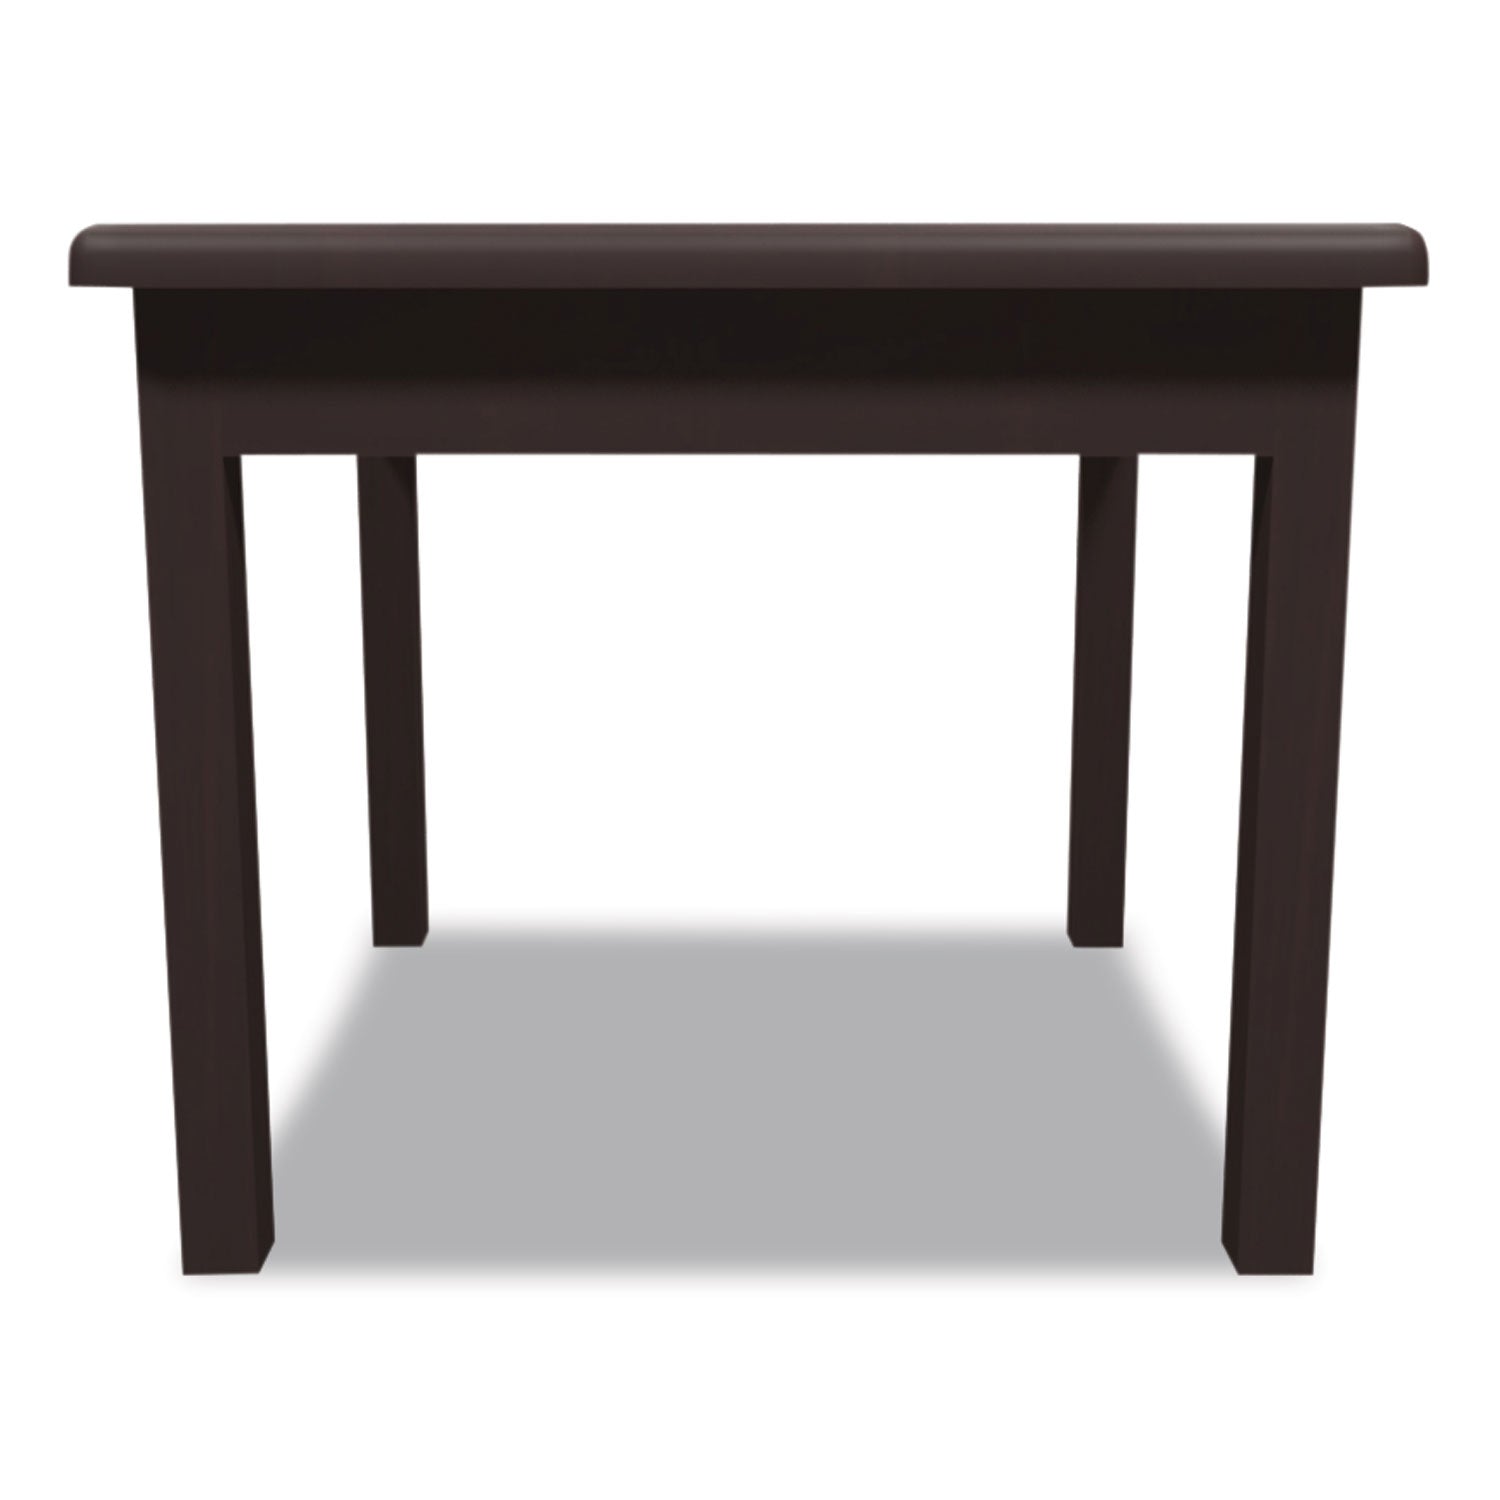 Laminate Occasional Table, Square, 24w x 24d x 20h, Mahogany - 